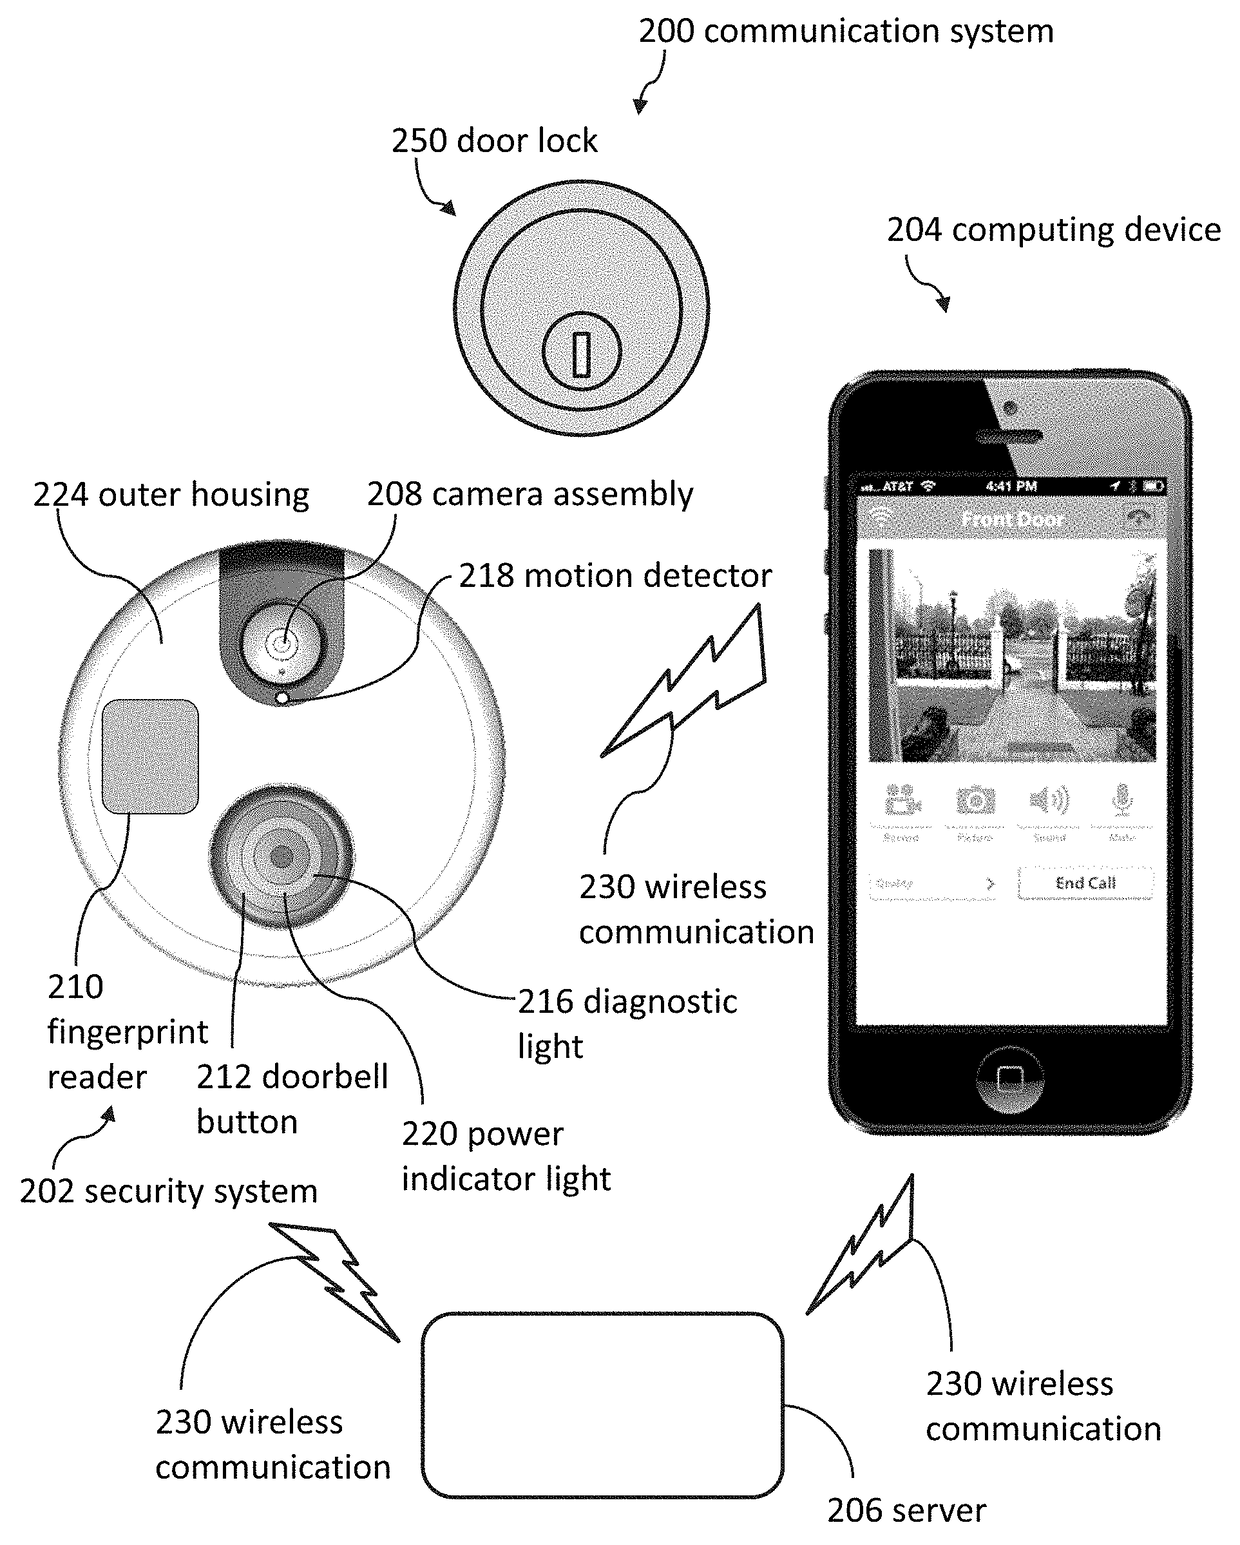 Doorbell communication and electrical systems